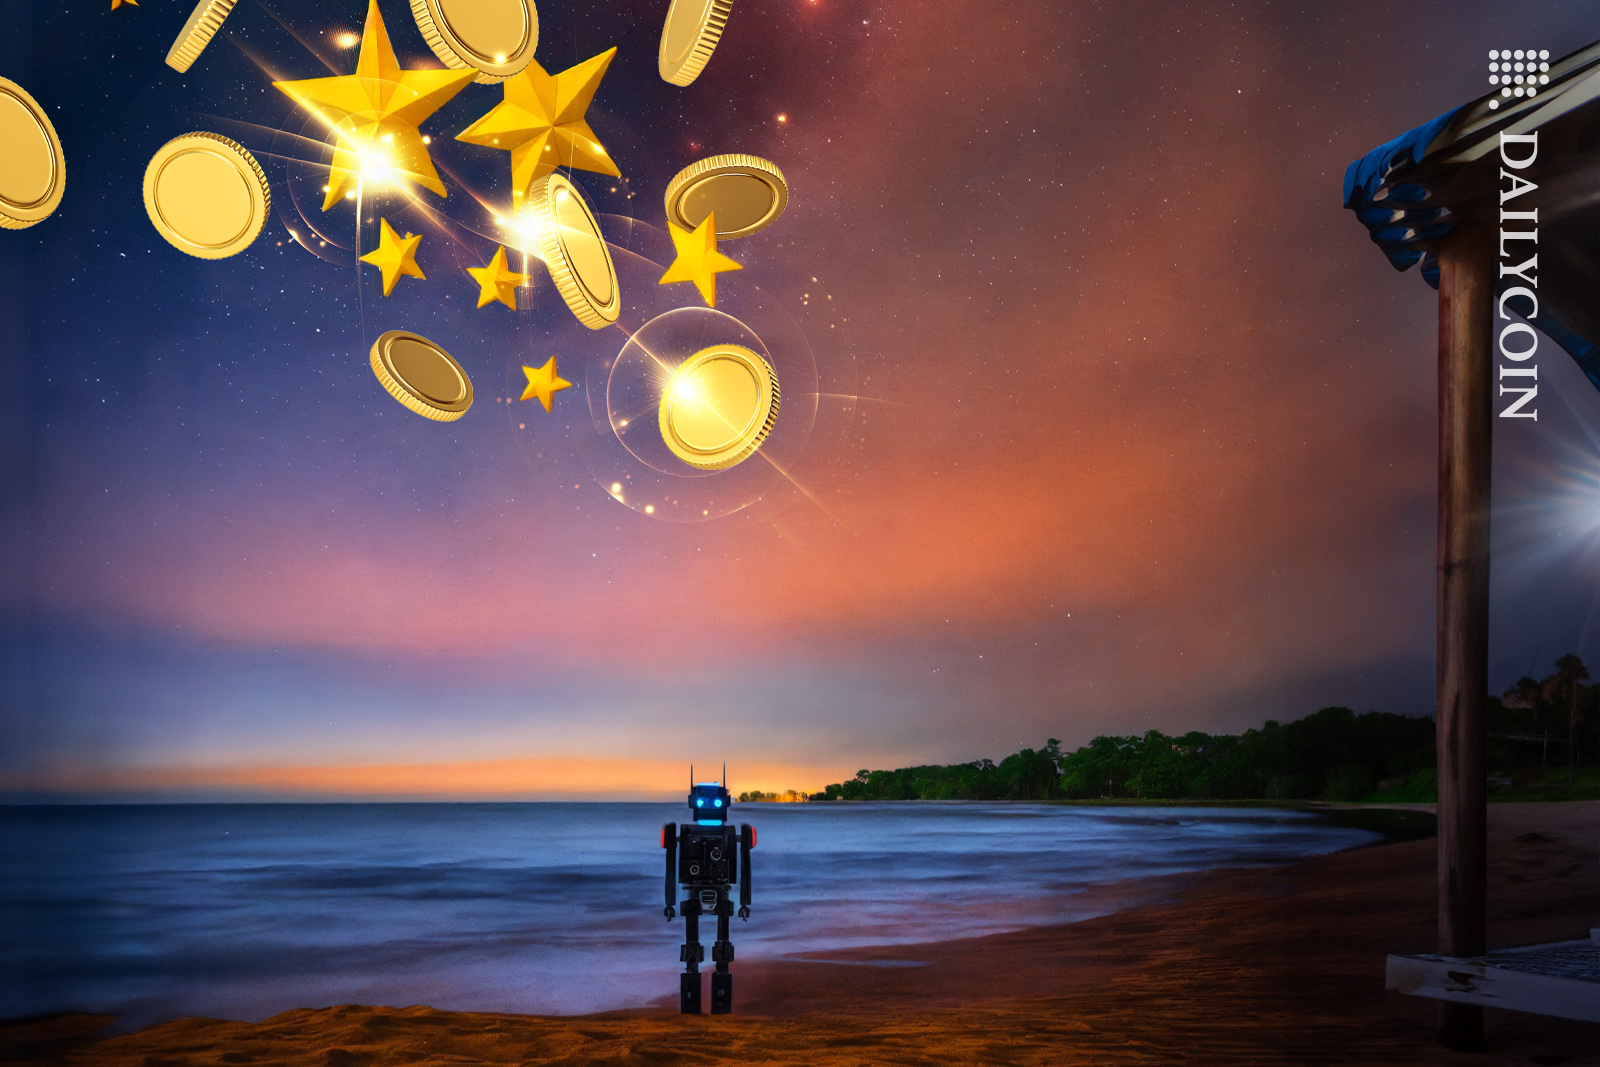 European stars are shooting with crypto coins to a robot on a beach.